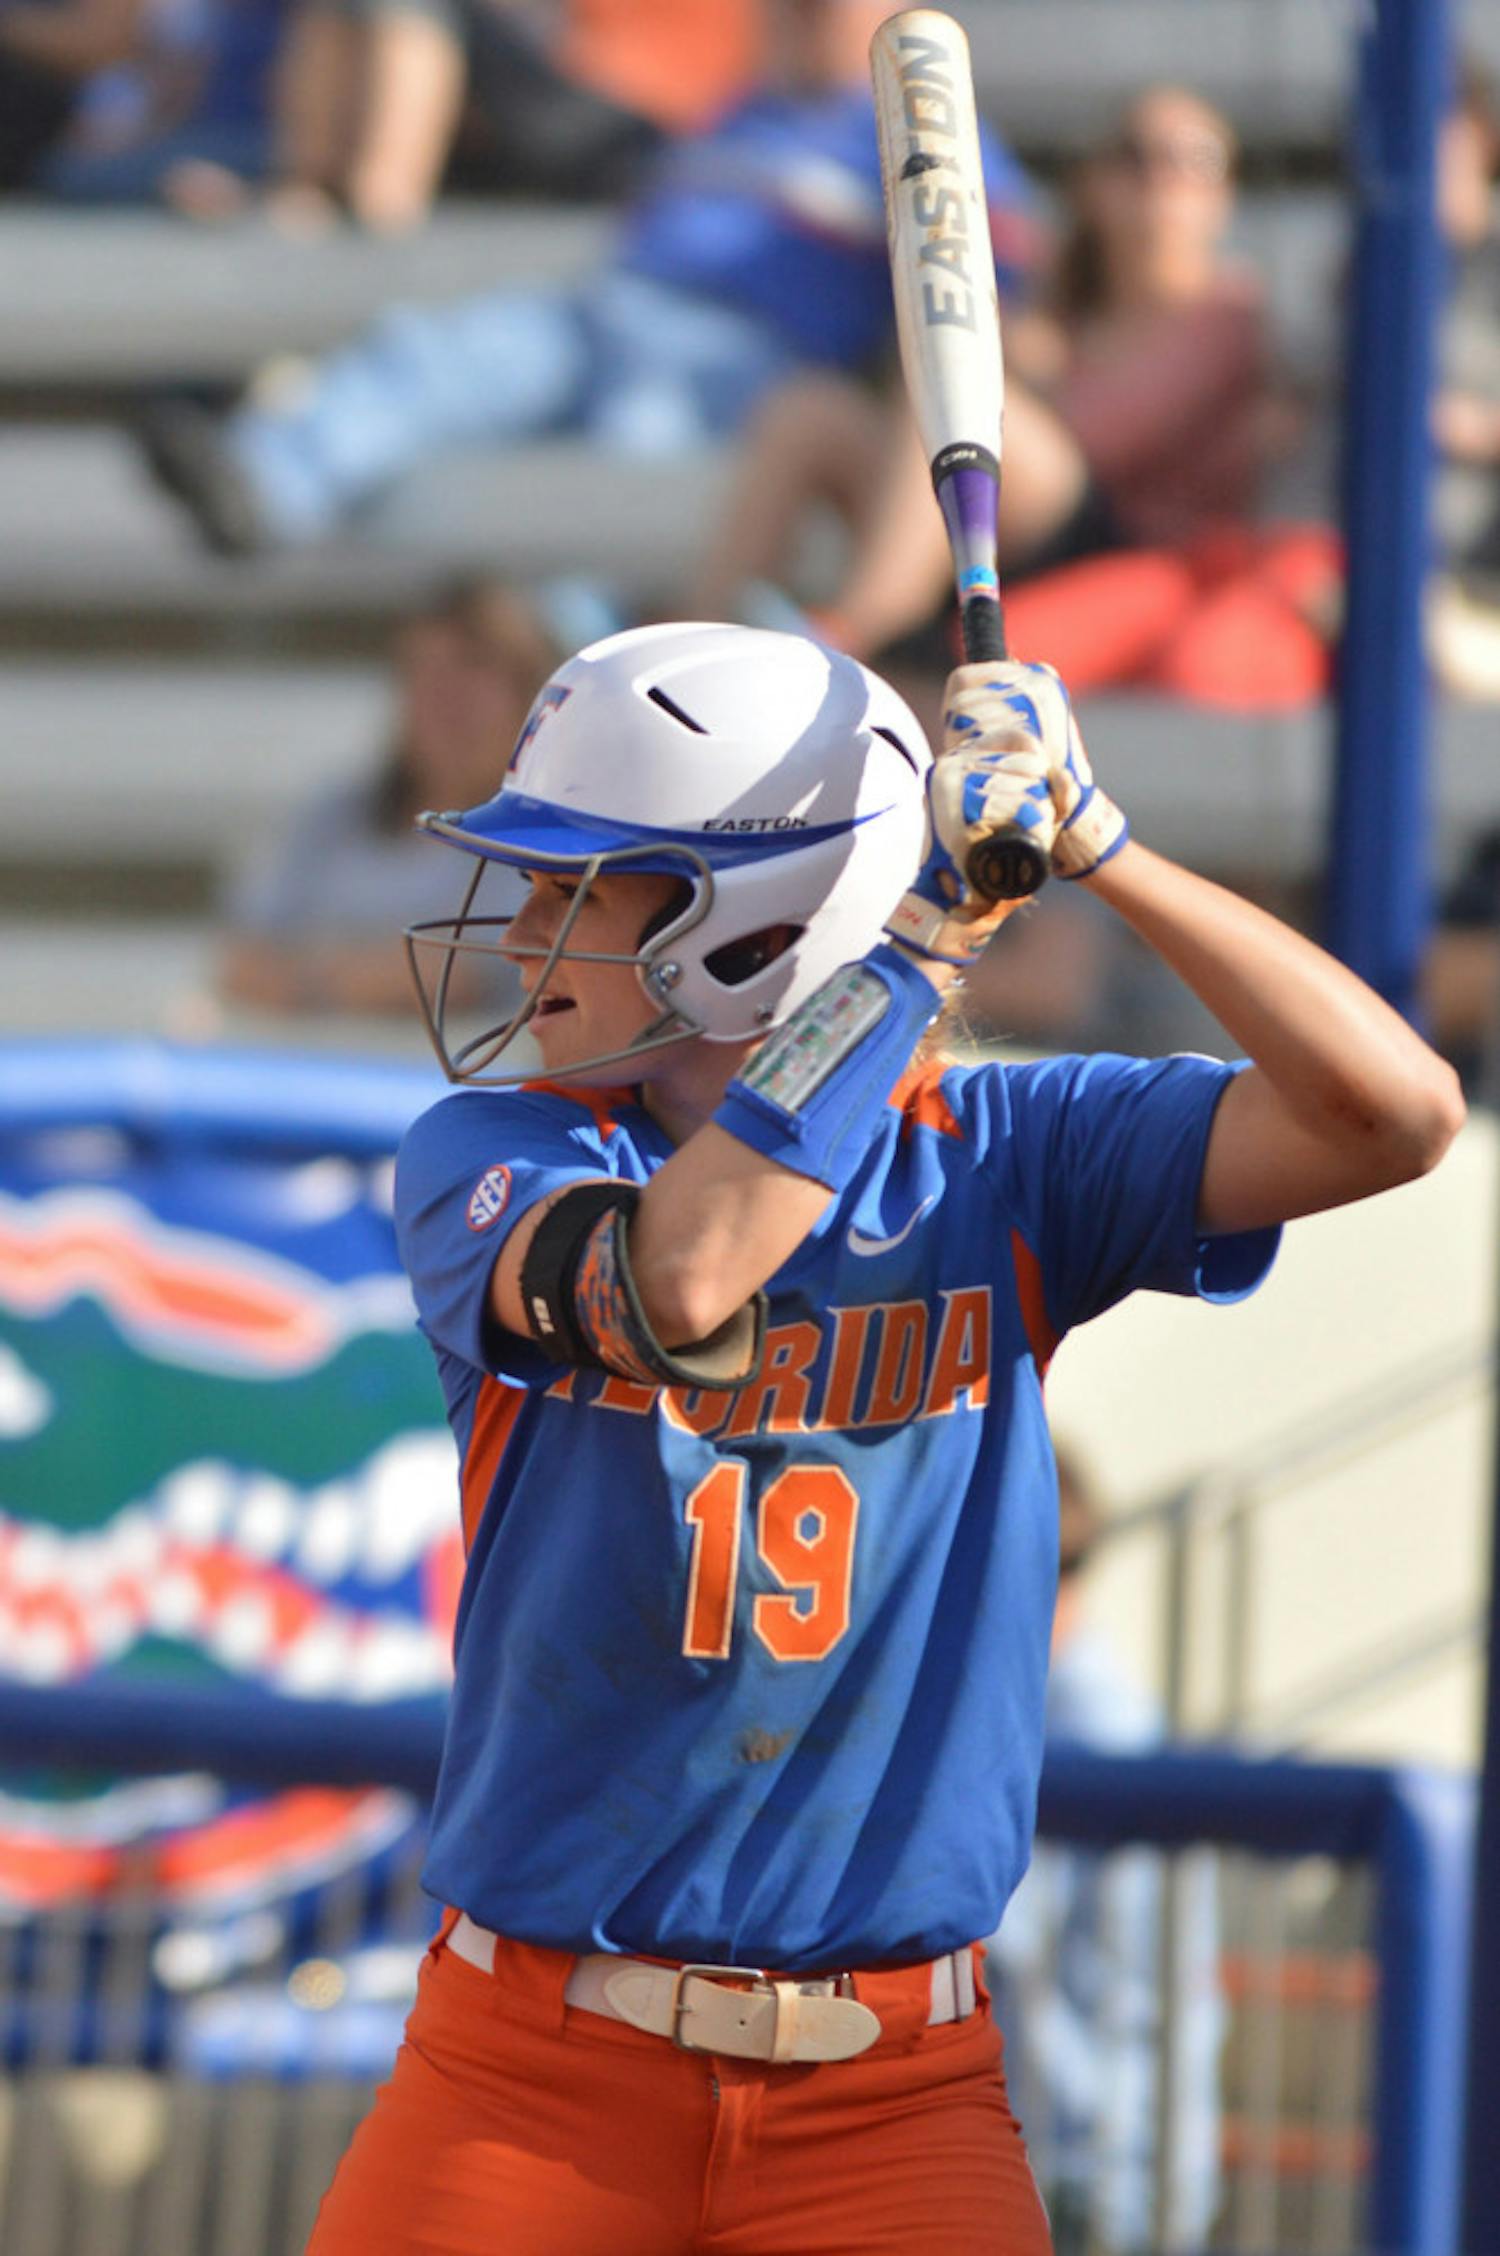 Chelsea Herndon bats during Florida's 8-0 win against Indiana on Feb. 22 at Katie Seashole Pressly Stadium. On Thusday, Herndon hit a pinch-hit grand slam to force a run-rule victory in Florida's 11-0 win against Baylor in the first game of the Women's College World Series.